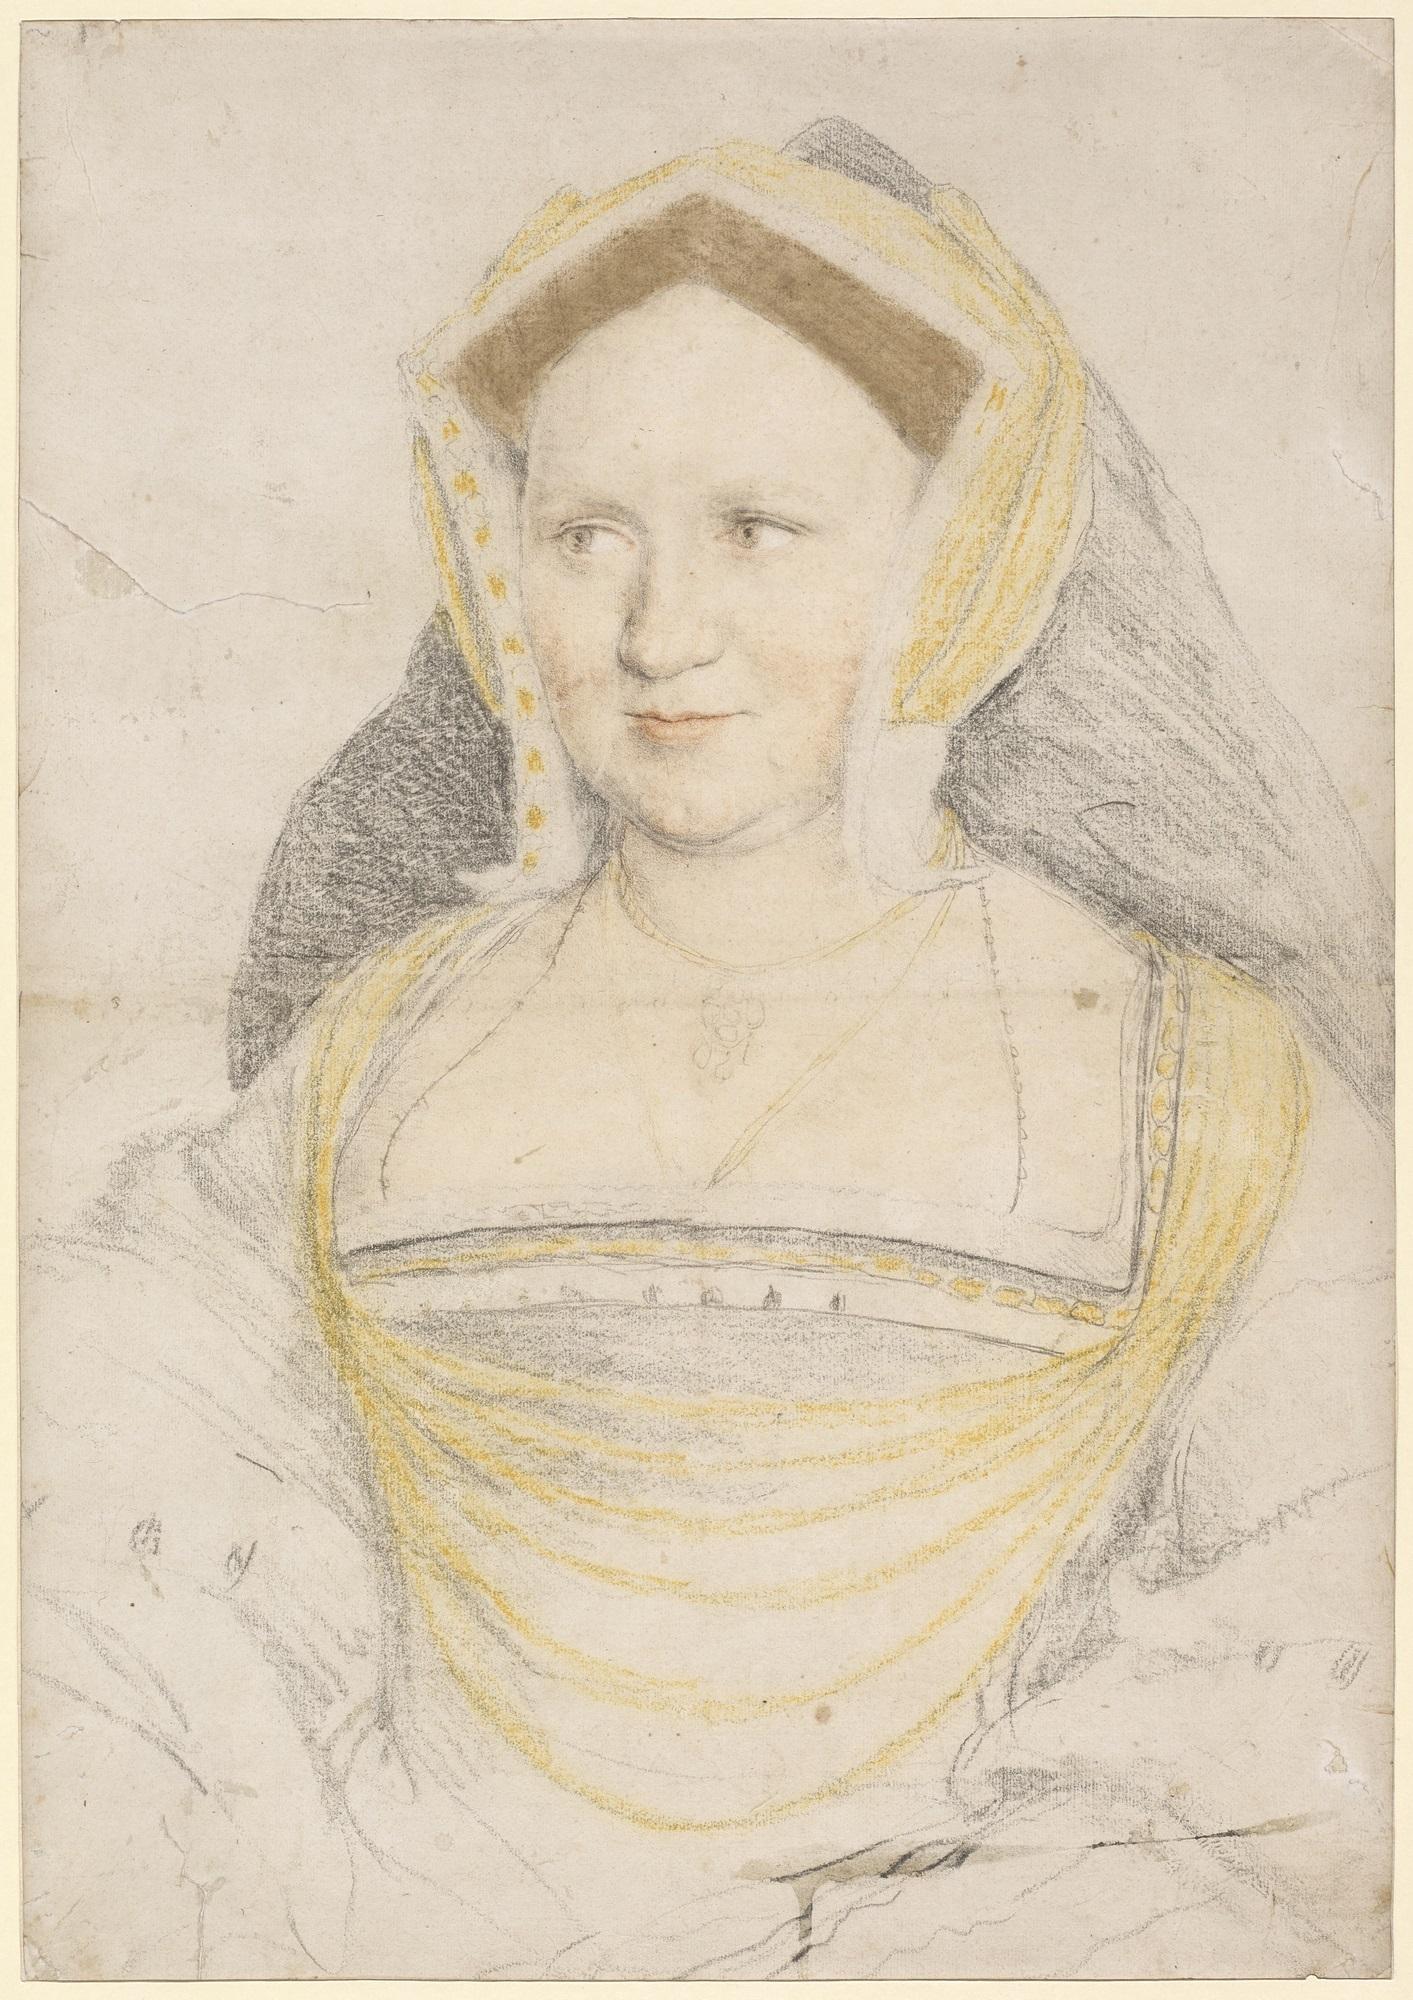 Hans Holbein the Younger, Mary, Lady Guildford, 1527. Oil on panel. 87 × 70.6 cm (34 1:4 × 27 13:16 in.). sketch.